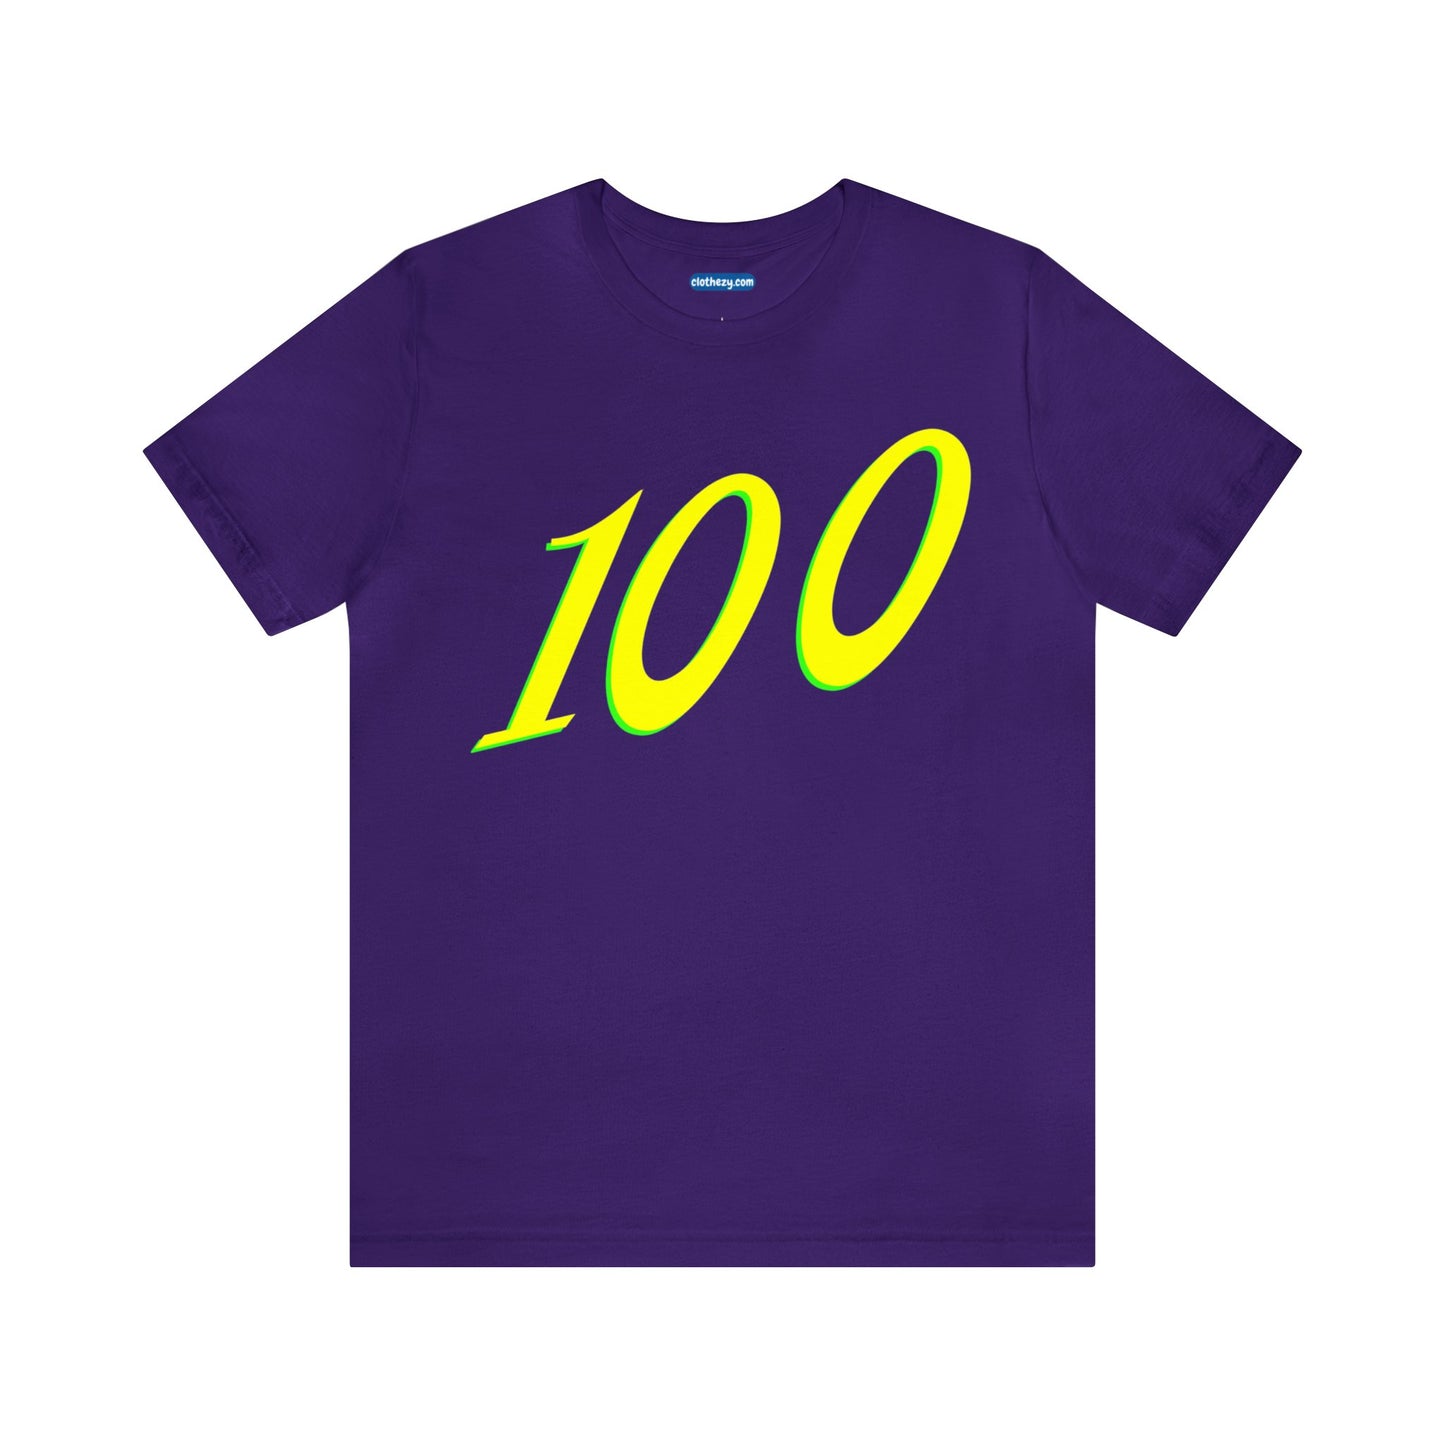 Number 100 Design - Soft Cotton Tee for birthdays and celebrations, Gift for friends and family, Multiple Options by clothezy.com in Purple Size Small - Buy Now